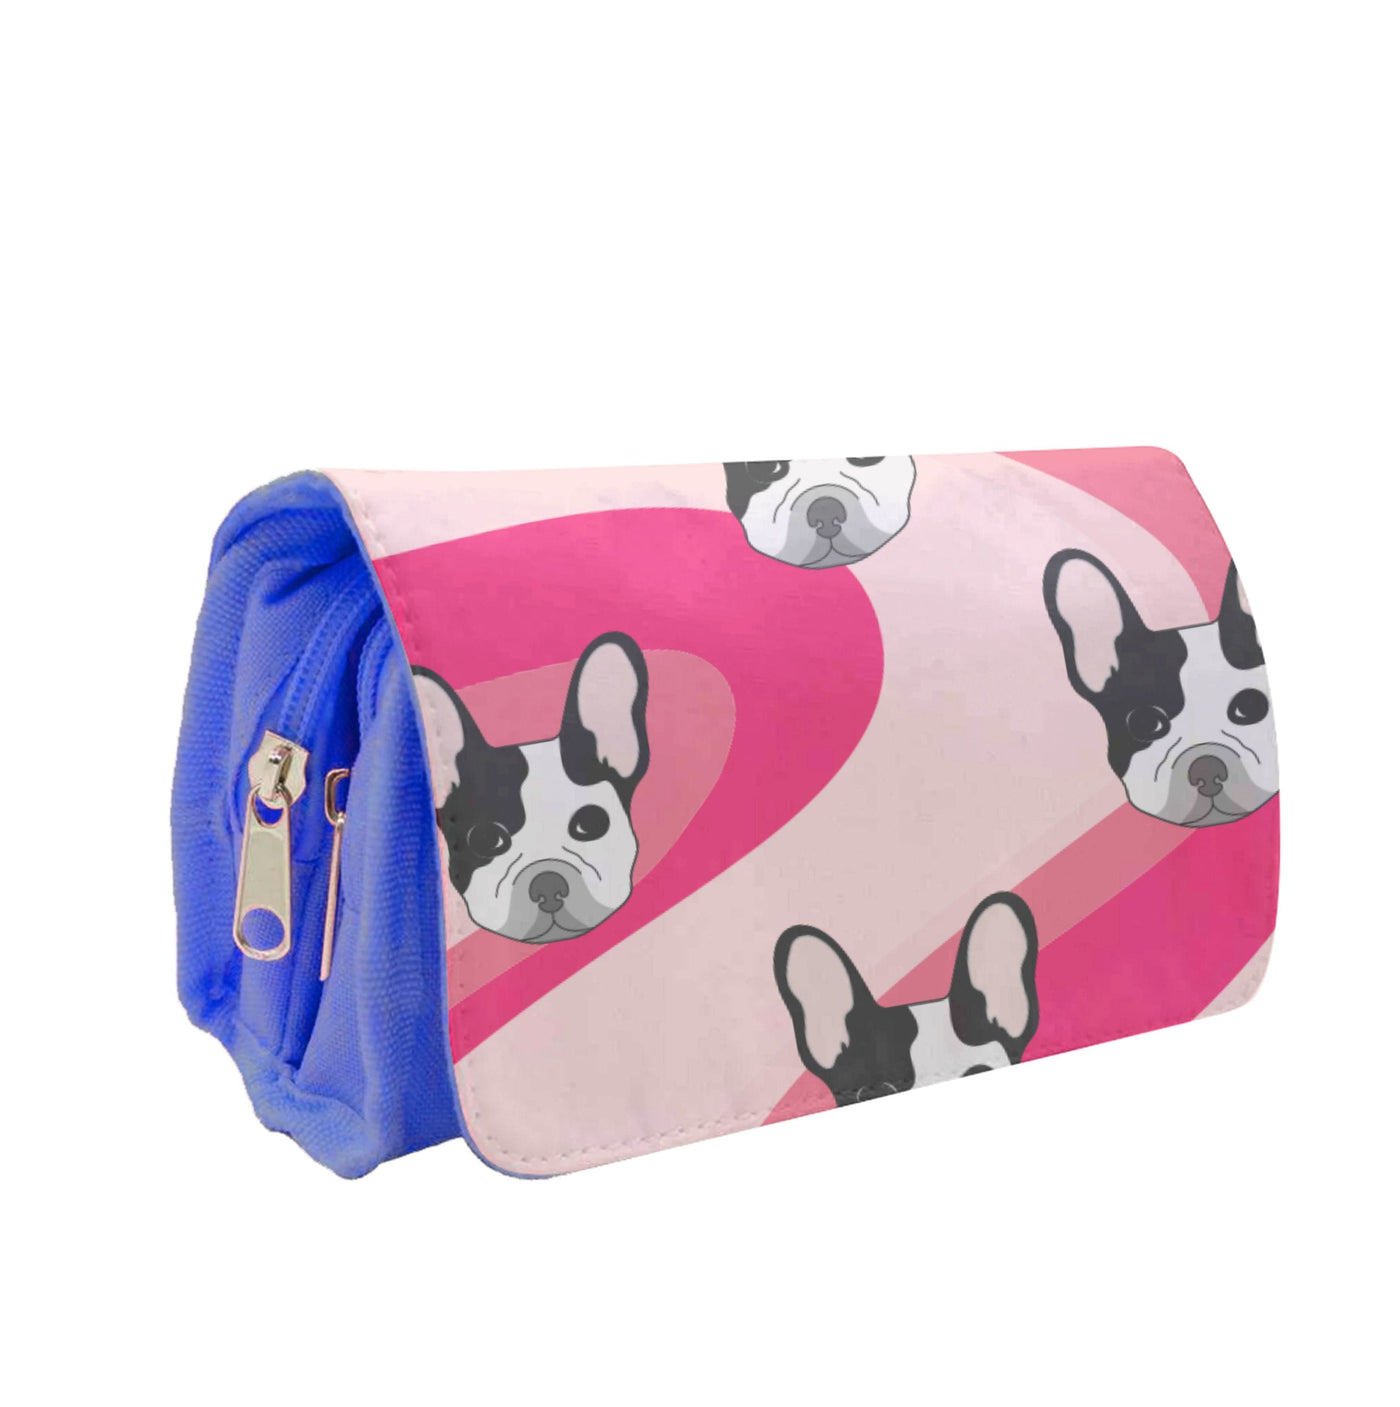 Abstact Frenchie - Dog Pattern Pencil Case